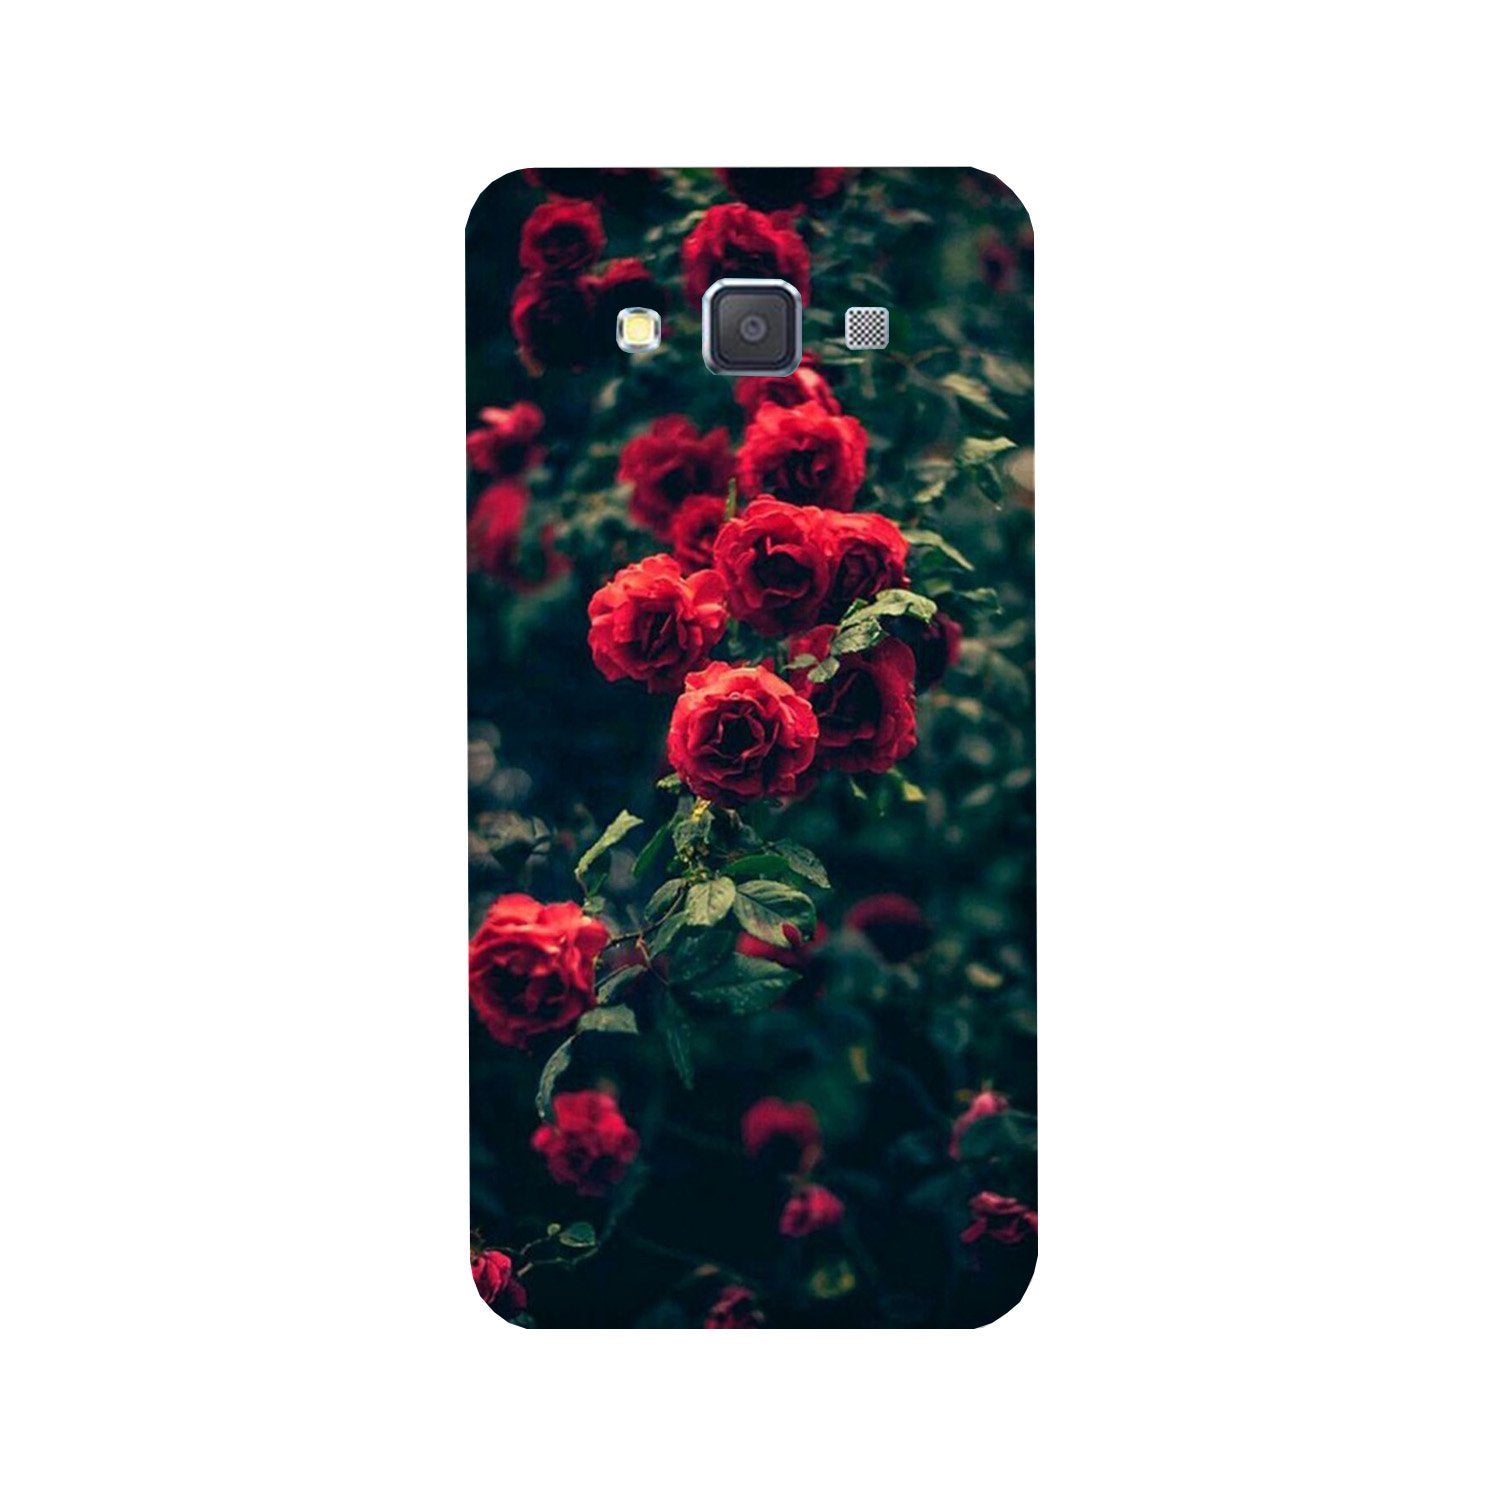 Red Rose Case for Galaxy Grand 2